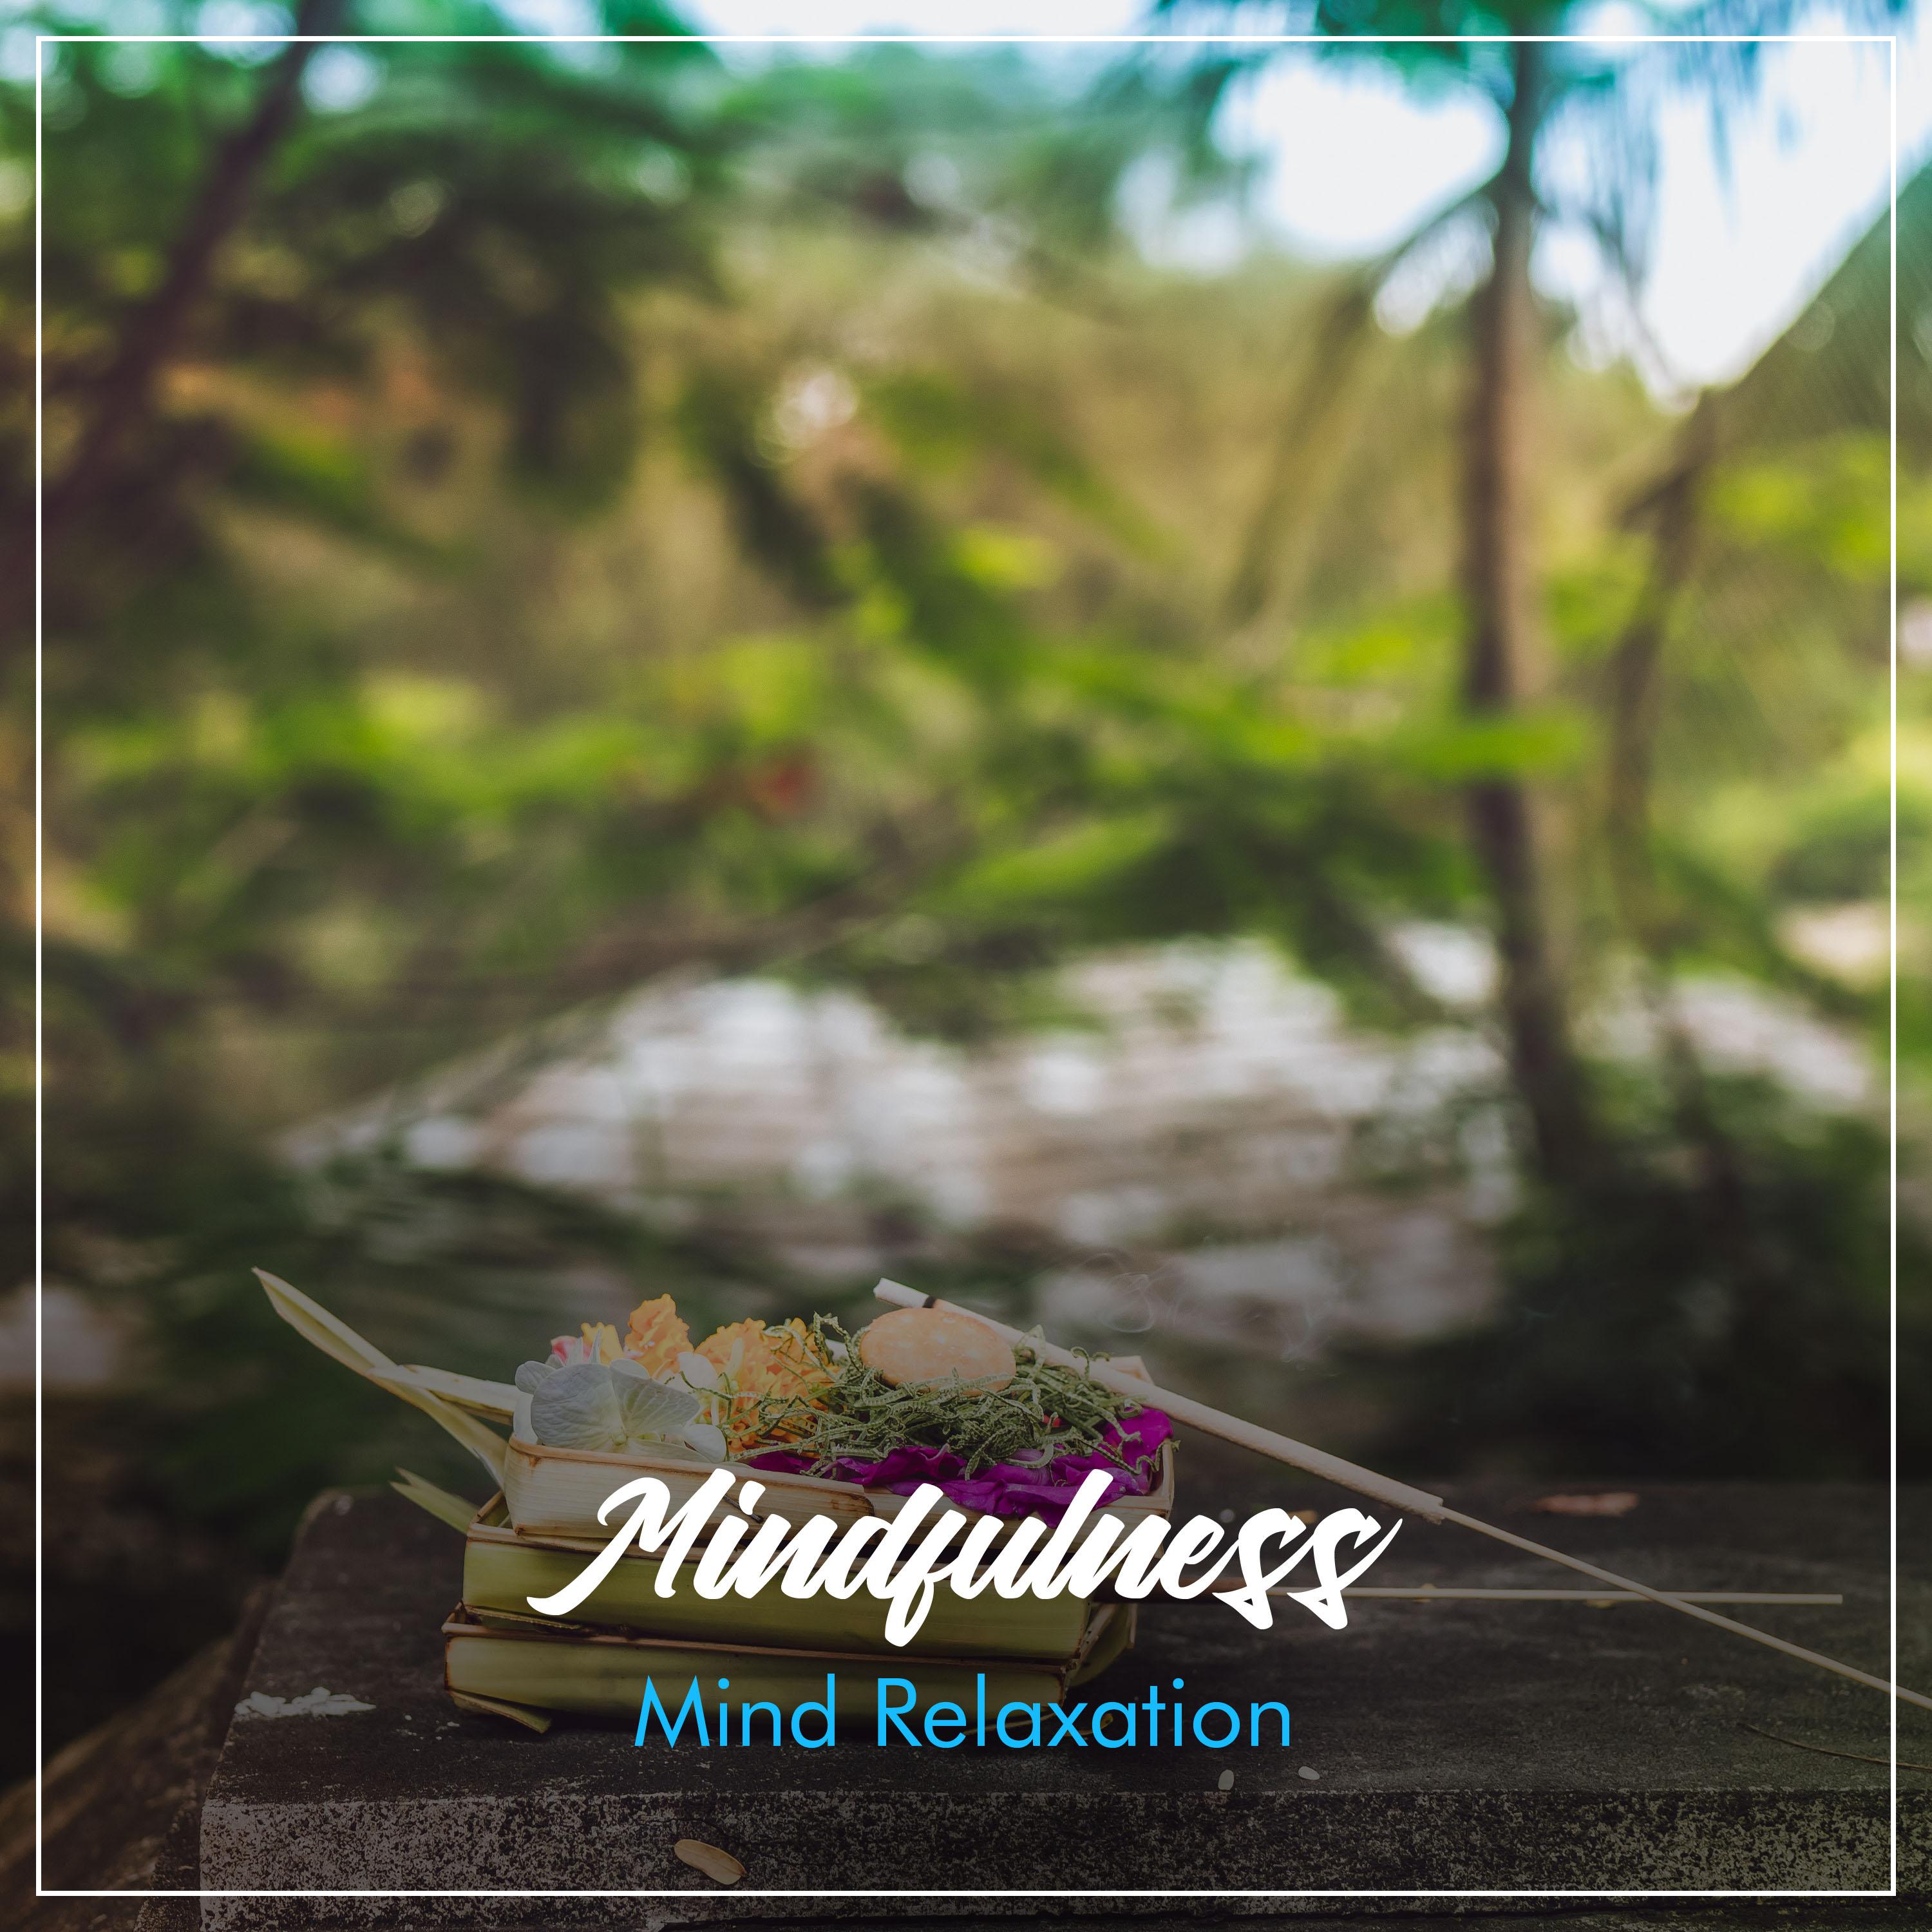 11 Mindfulness Sounds for Mind Relaxation